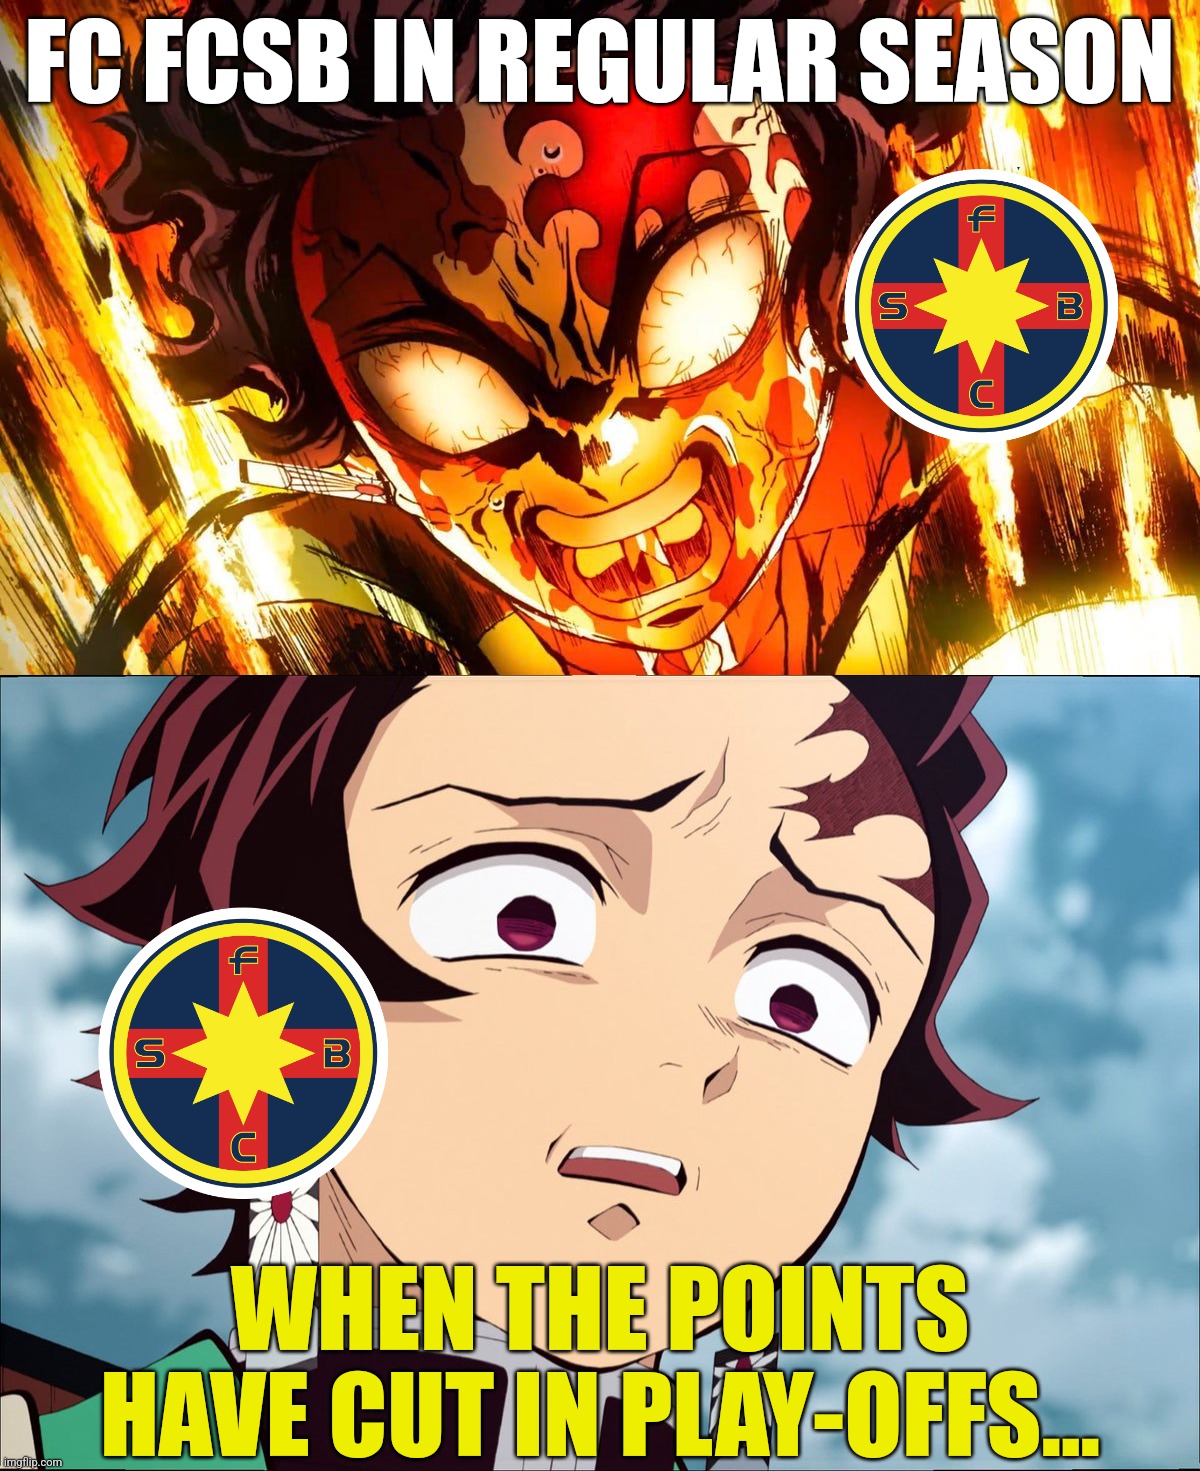 FC FCSB = Champions of Romania for 6th/27th time in their history? | FC FCSB IN REGULAR SEASON; WHEN THE POINTS HAVE CUT IN PLAY-OFFS... | image tagged in tanjiro,fcsb,demon slayer,superliga,romania,futbol | made w/ Imgflip meme maker